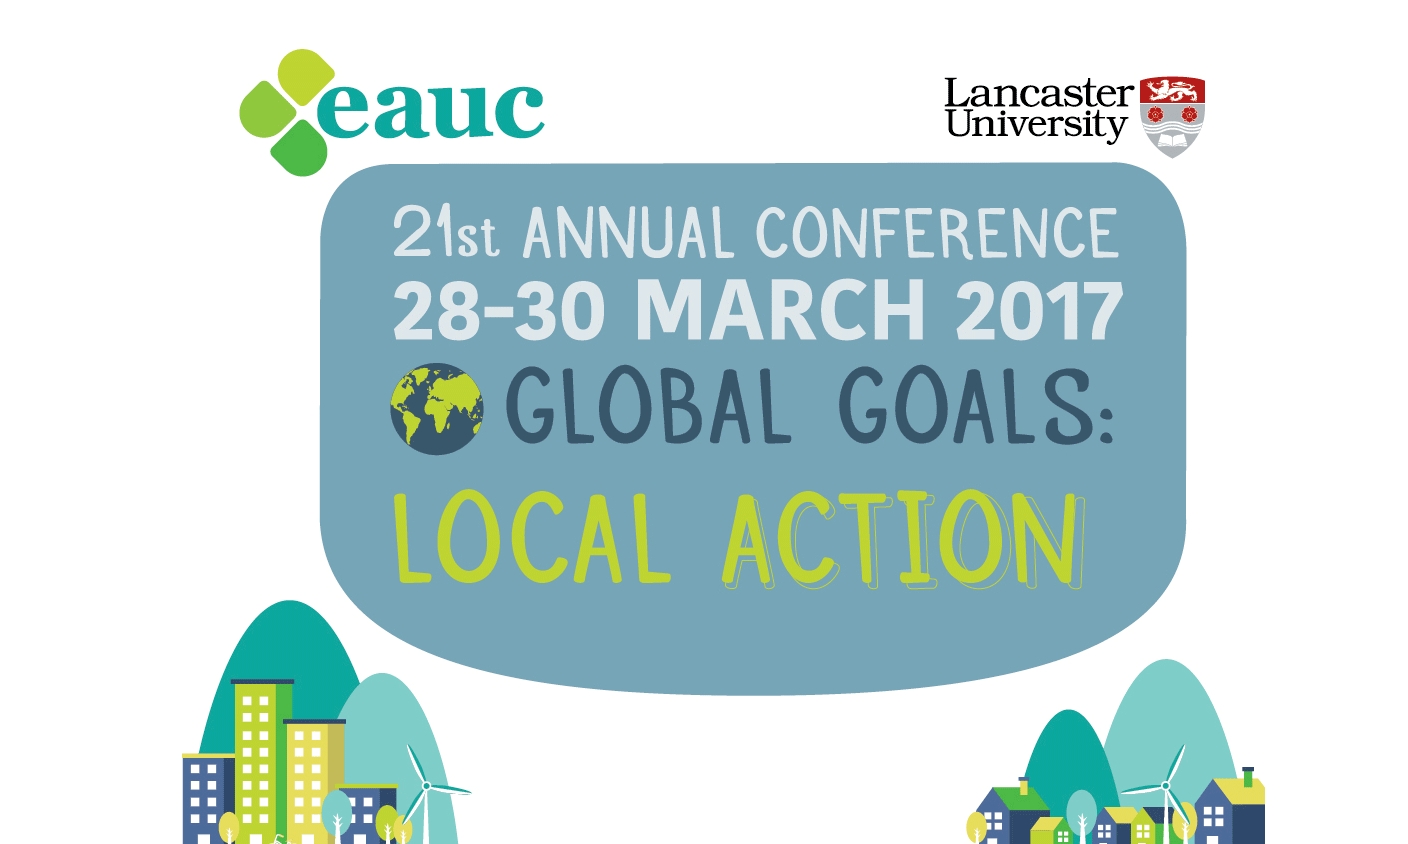 EAUC Annual Conference 2017